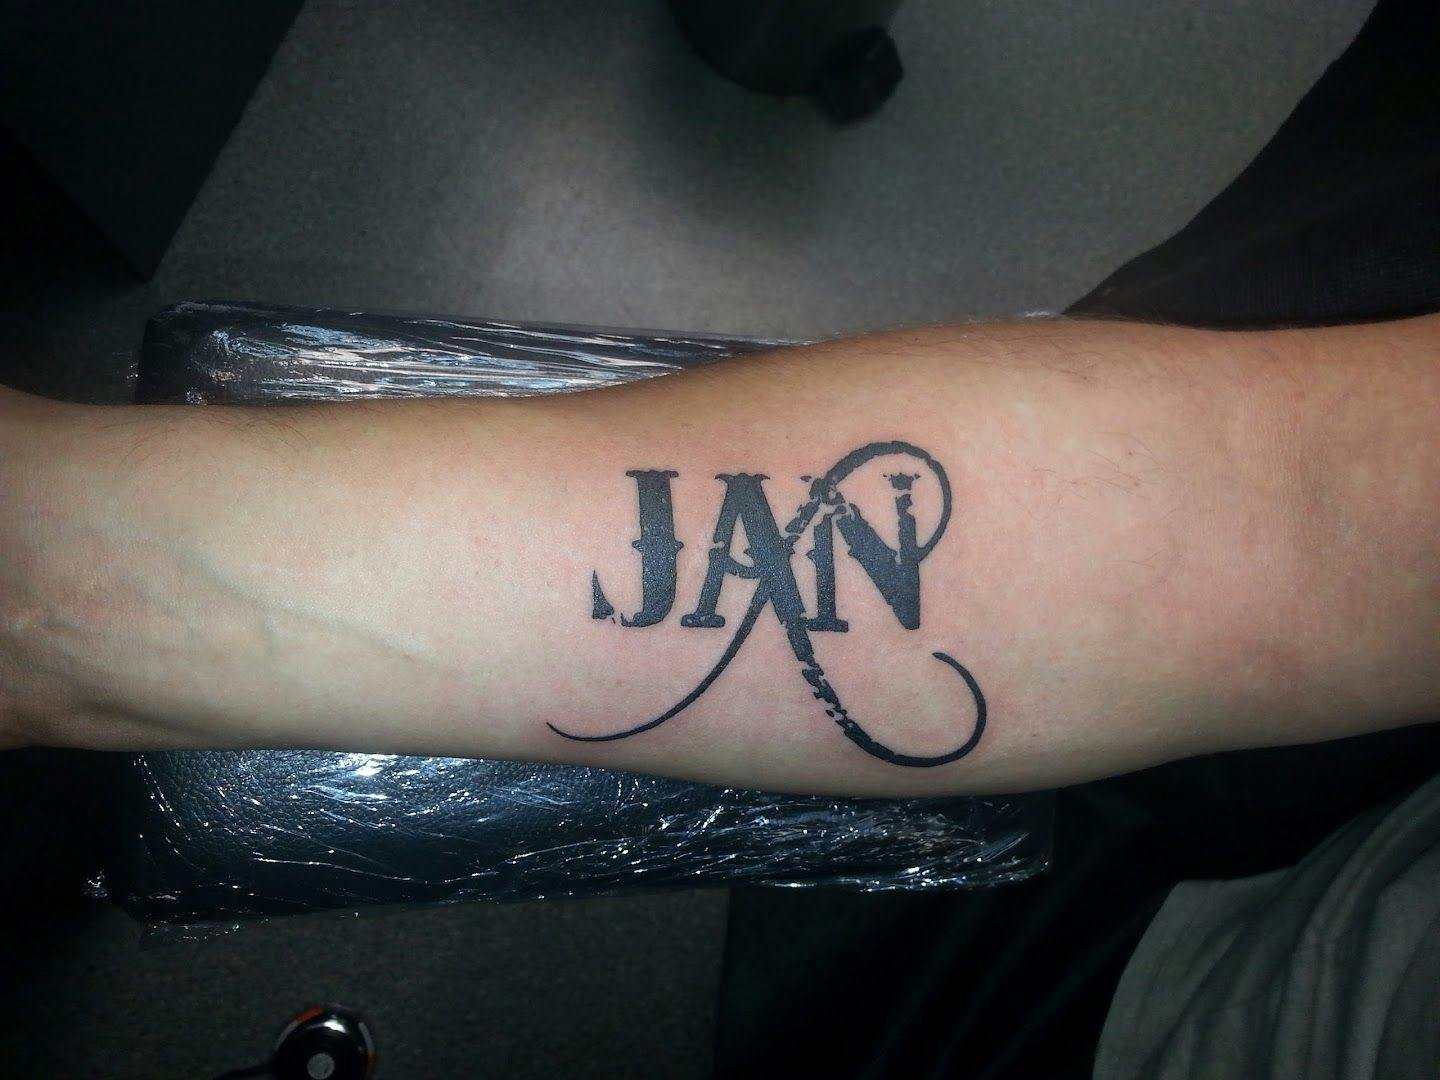 a narben tattoo with the word'a'on it, schwäbisch hall, germany